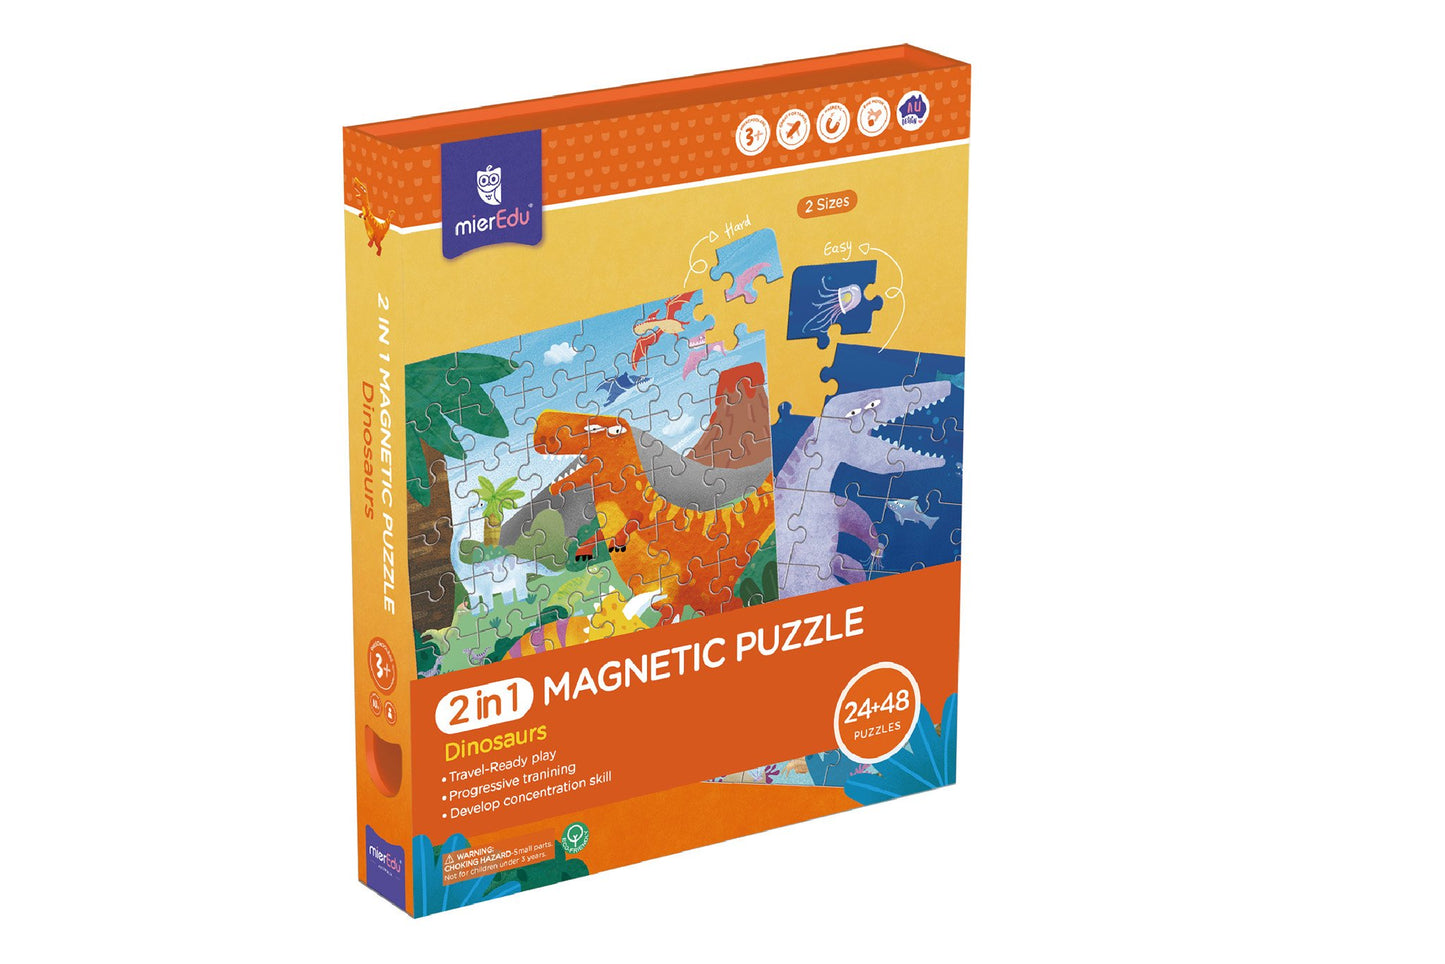 MierEdu 2 In 1 Magnetic Puzzle - Dinosaurs